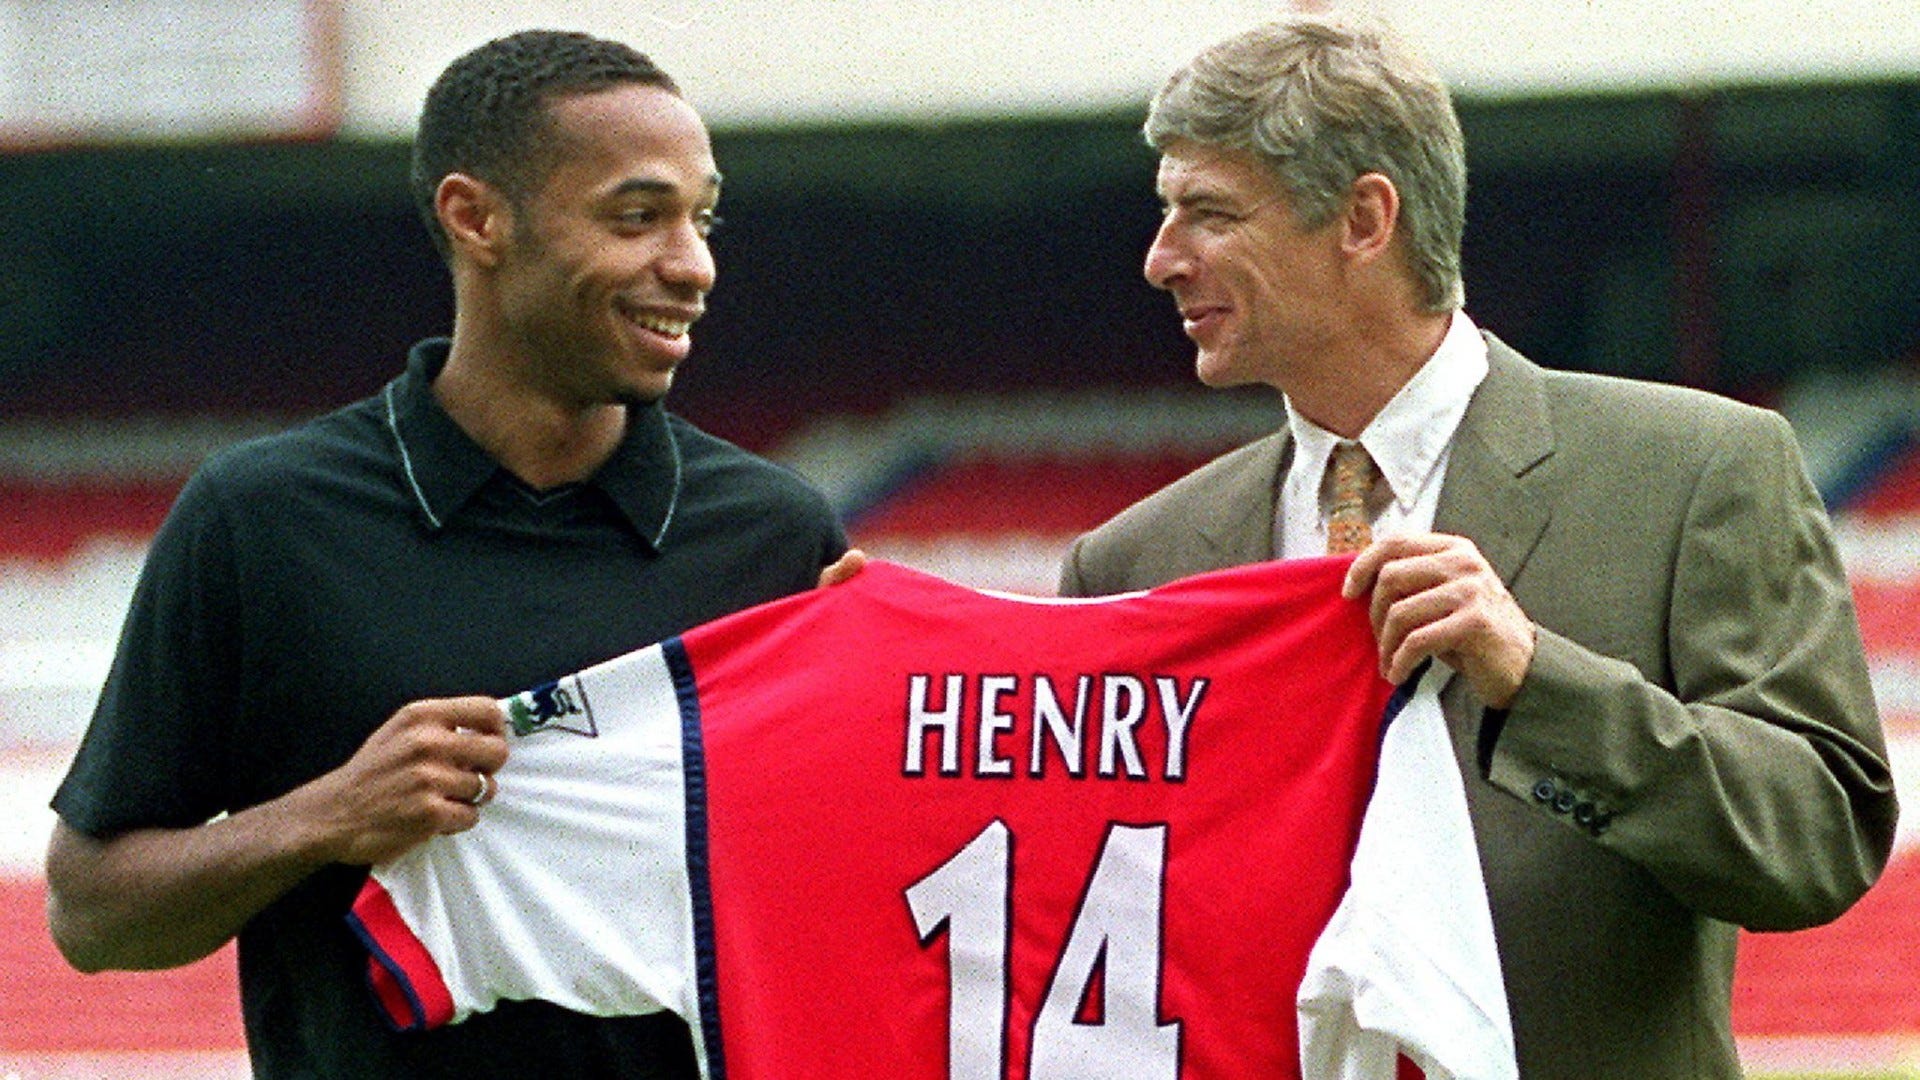 Thierry Henry, Arsenal, 1999/00